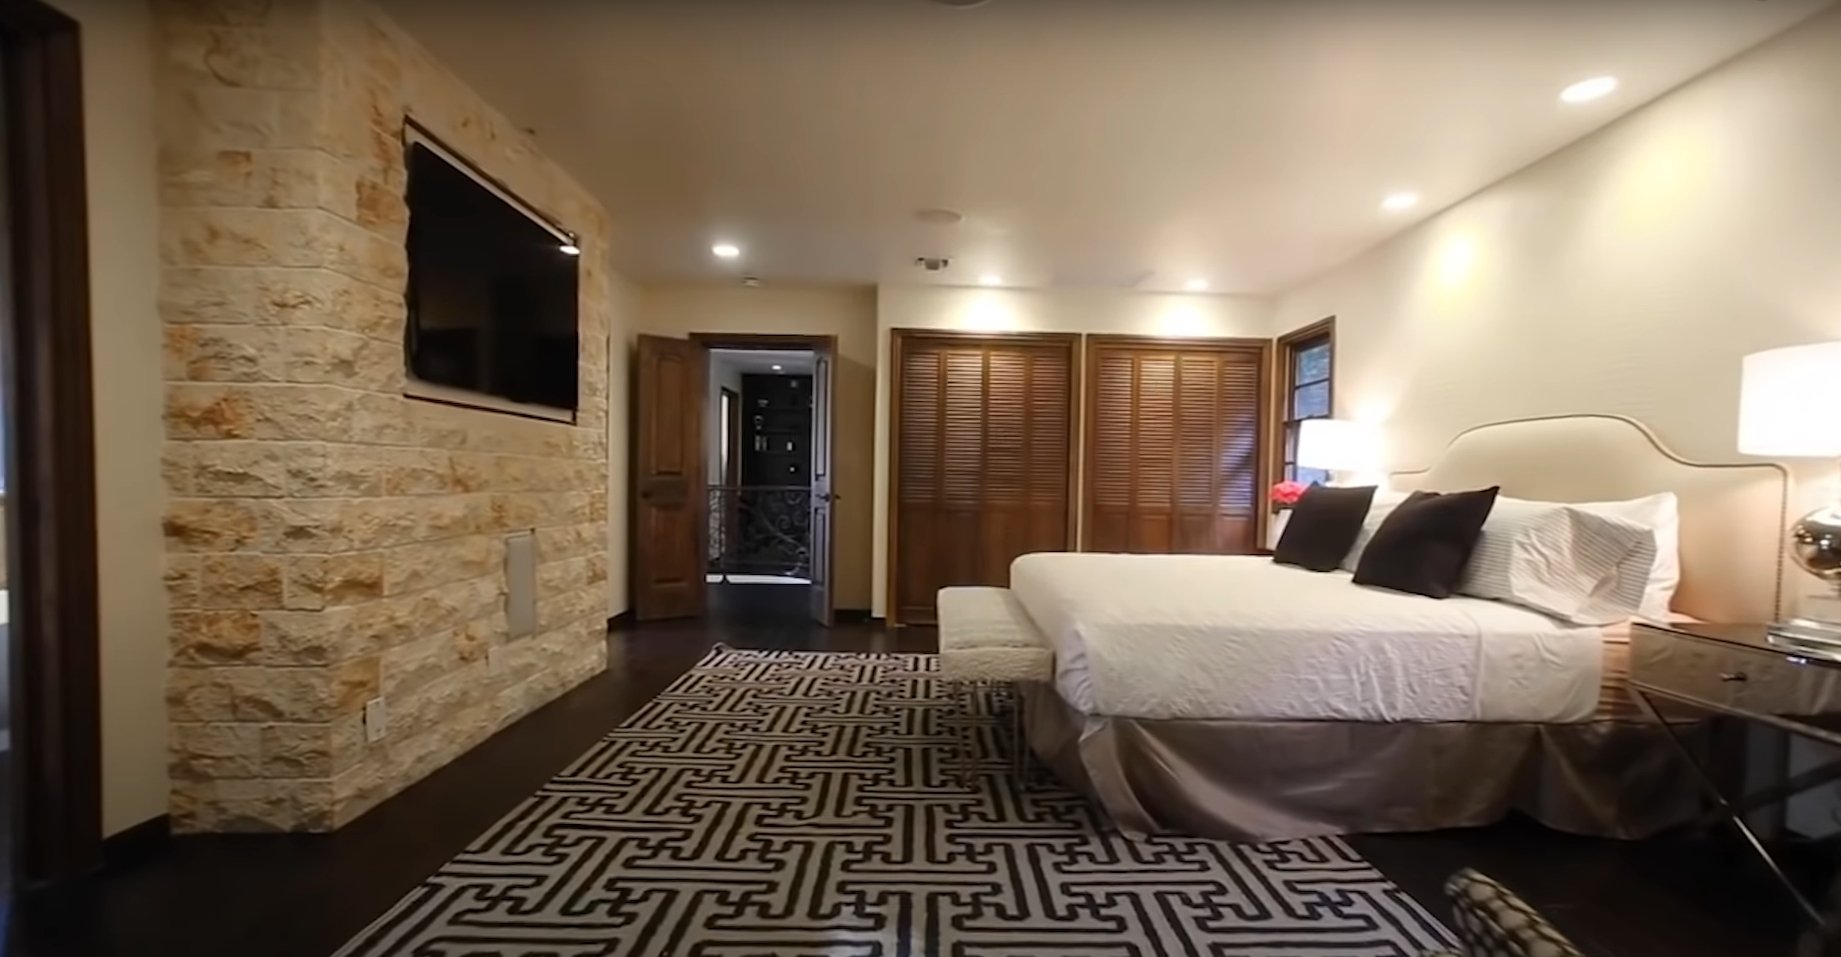 Inside Dwayne Johnson's Beverly Park home | Photo: YouTube/TheRichest